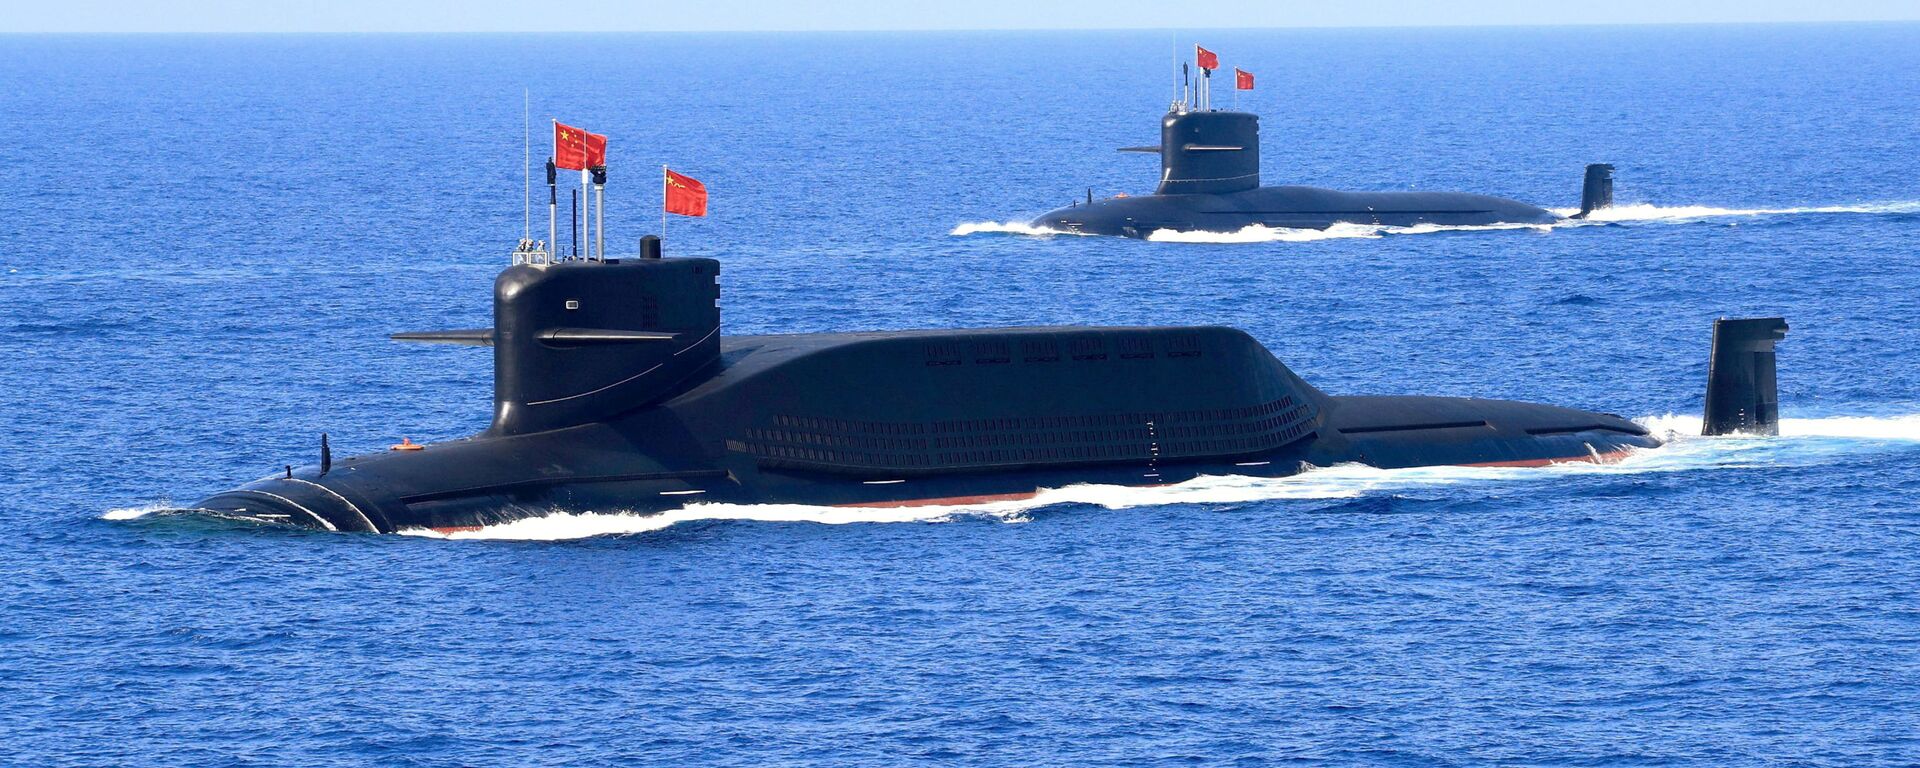 A nuclear-powered Type 094A Jin-class ballistic missile submarine of the Chinese People's Liberation Army (PLA) Navy is seen during a military display in the South China Sea April 12, 2018 - Sputnik International, 1920, 18.09.2021